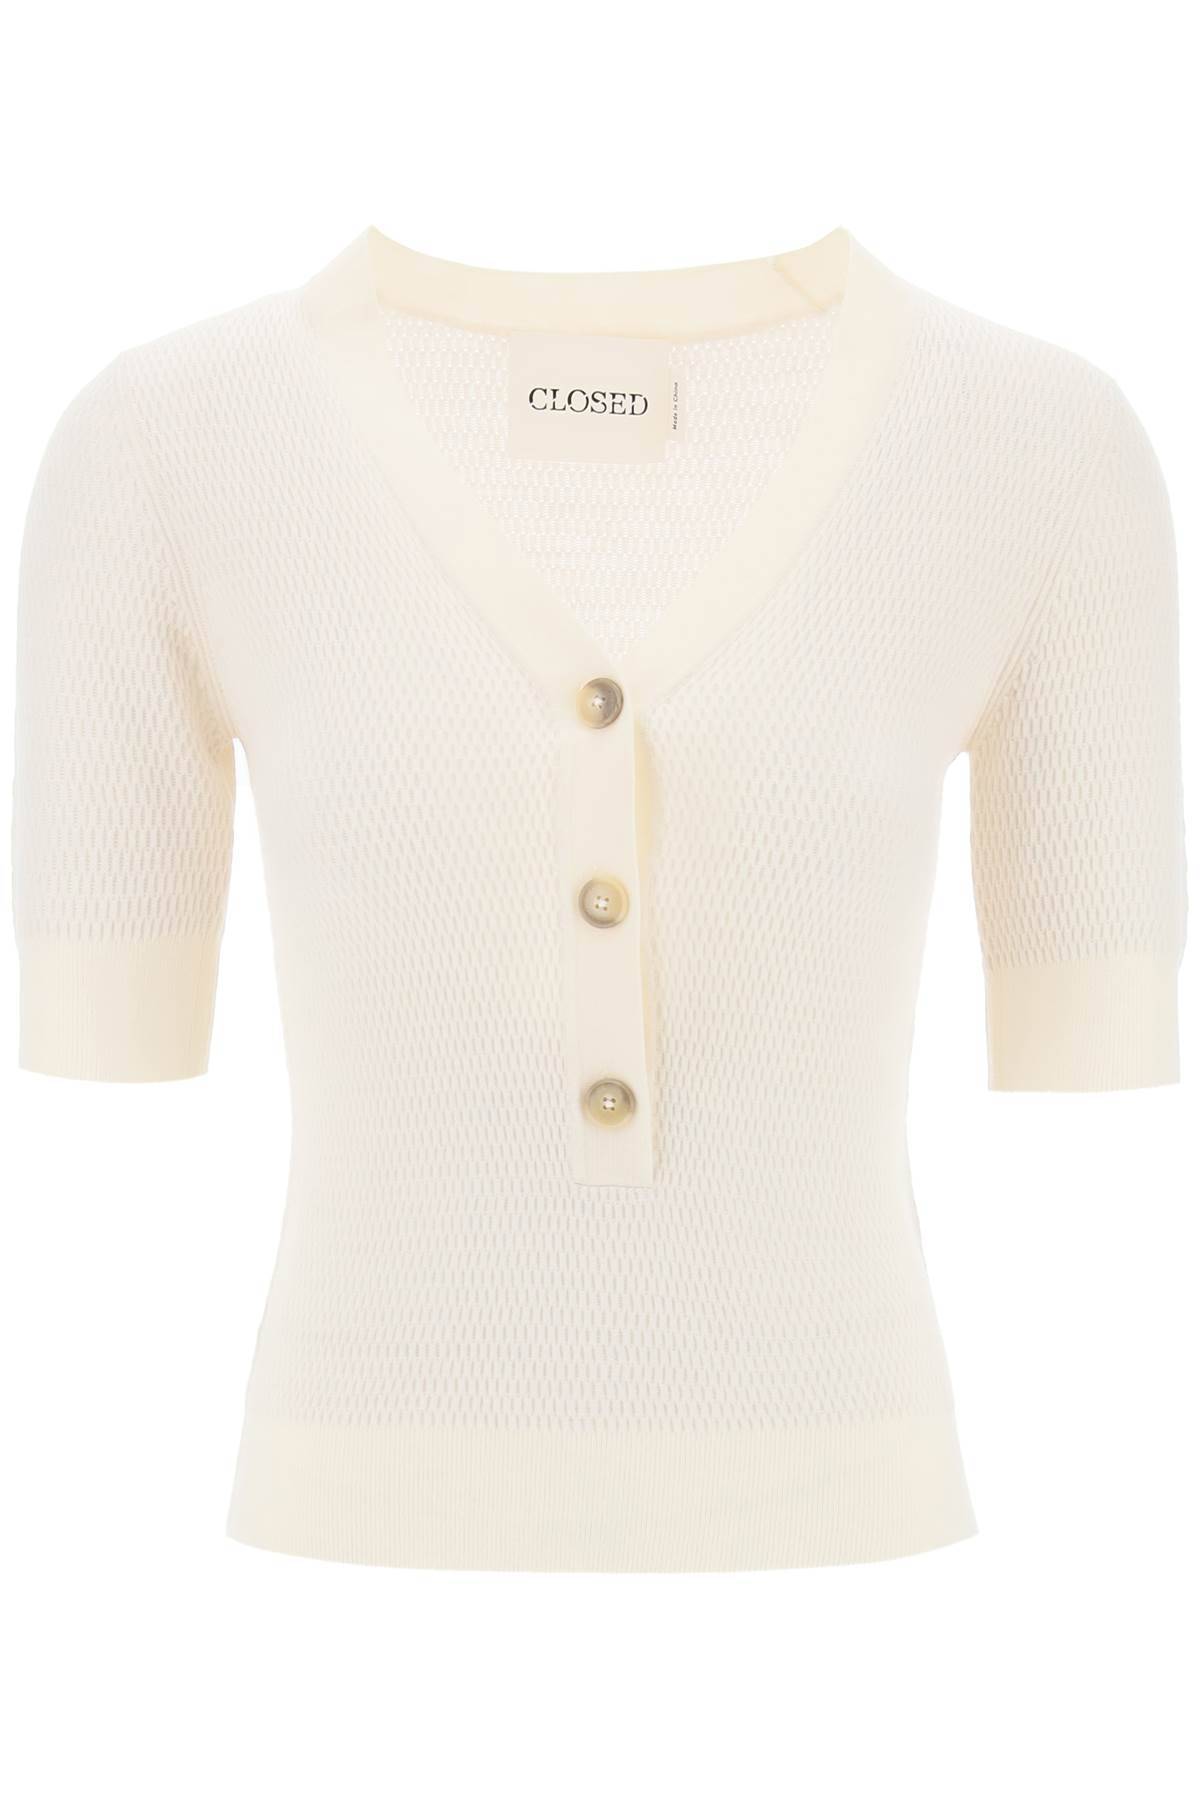 CLOSED CLOSED knitted top with short sleeves